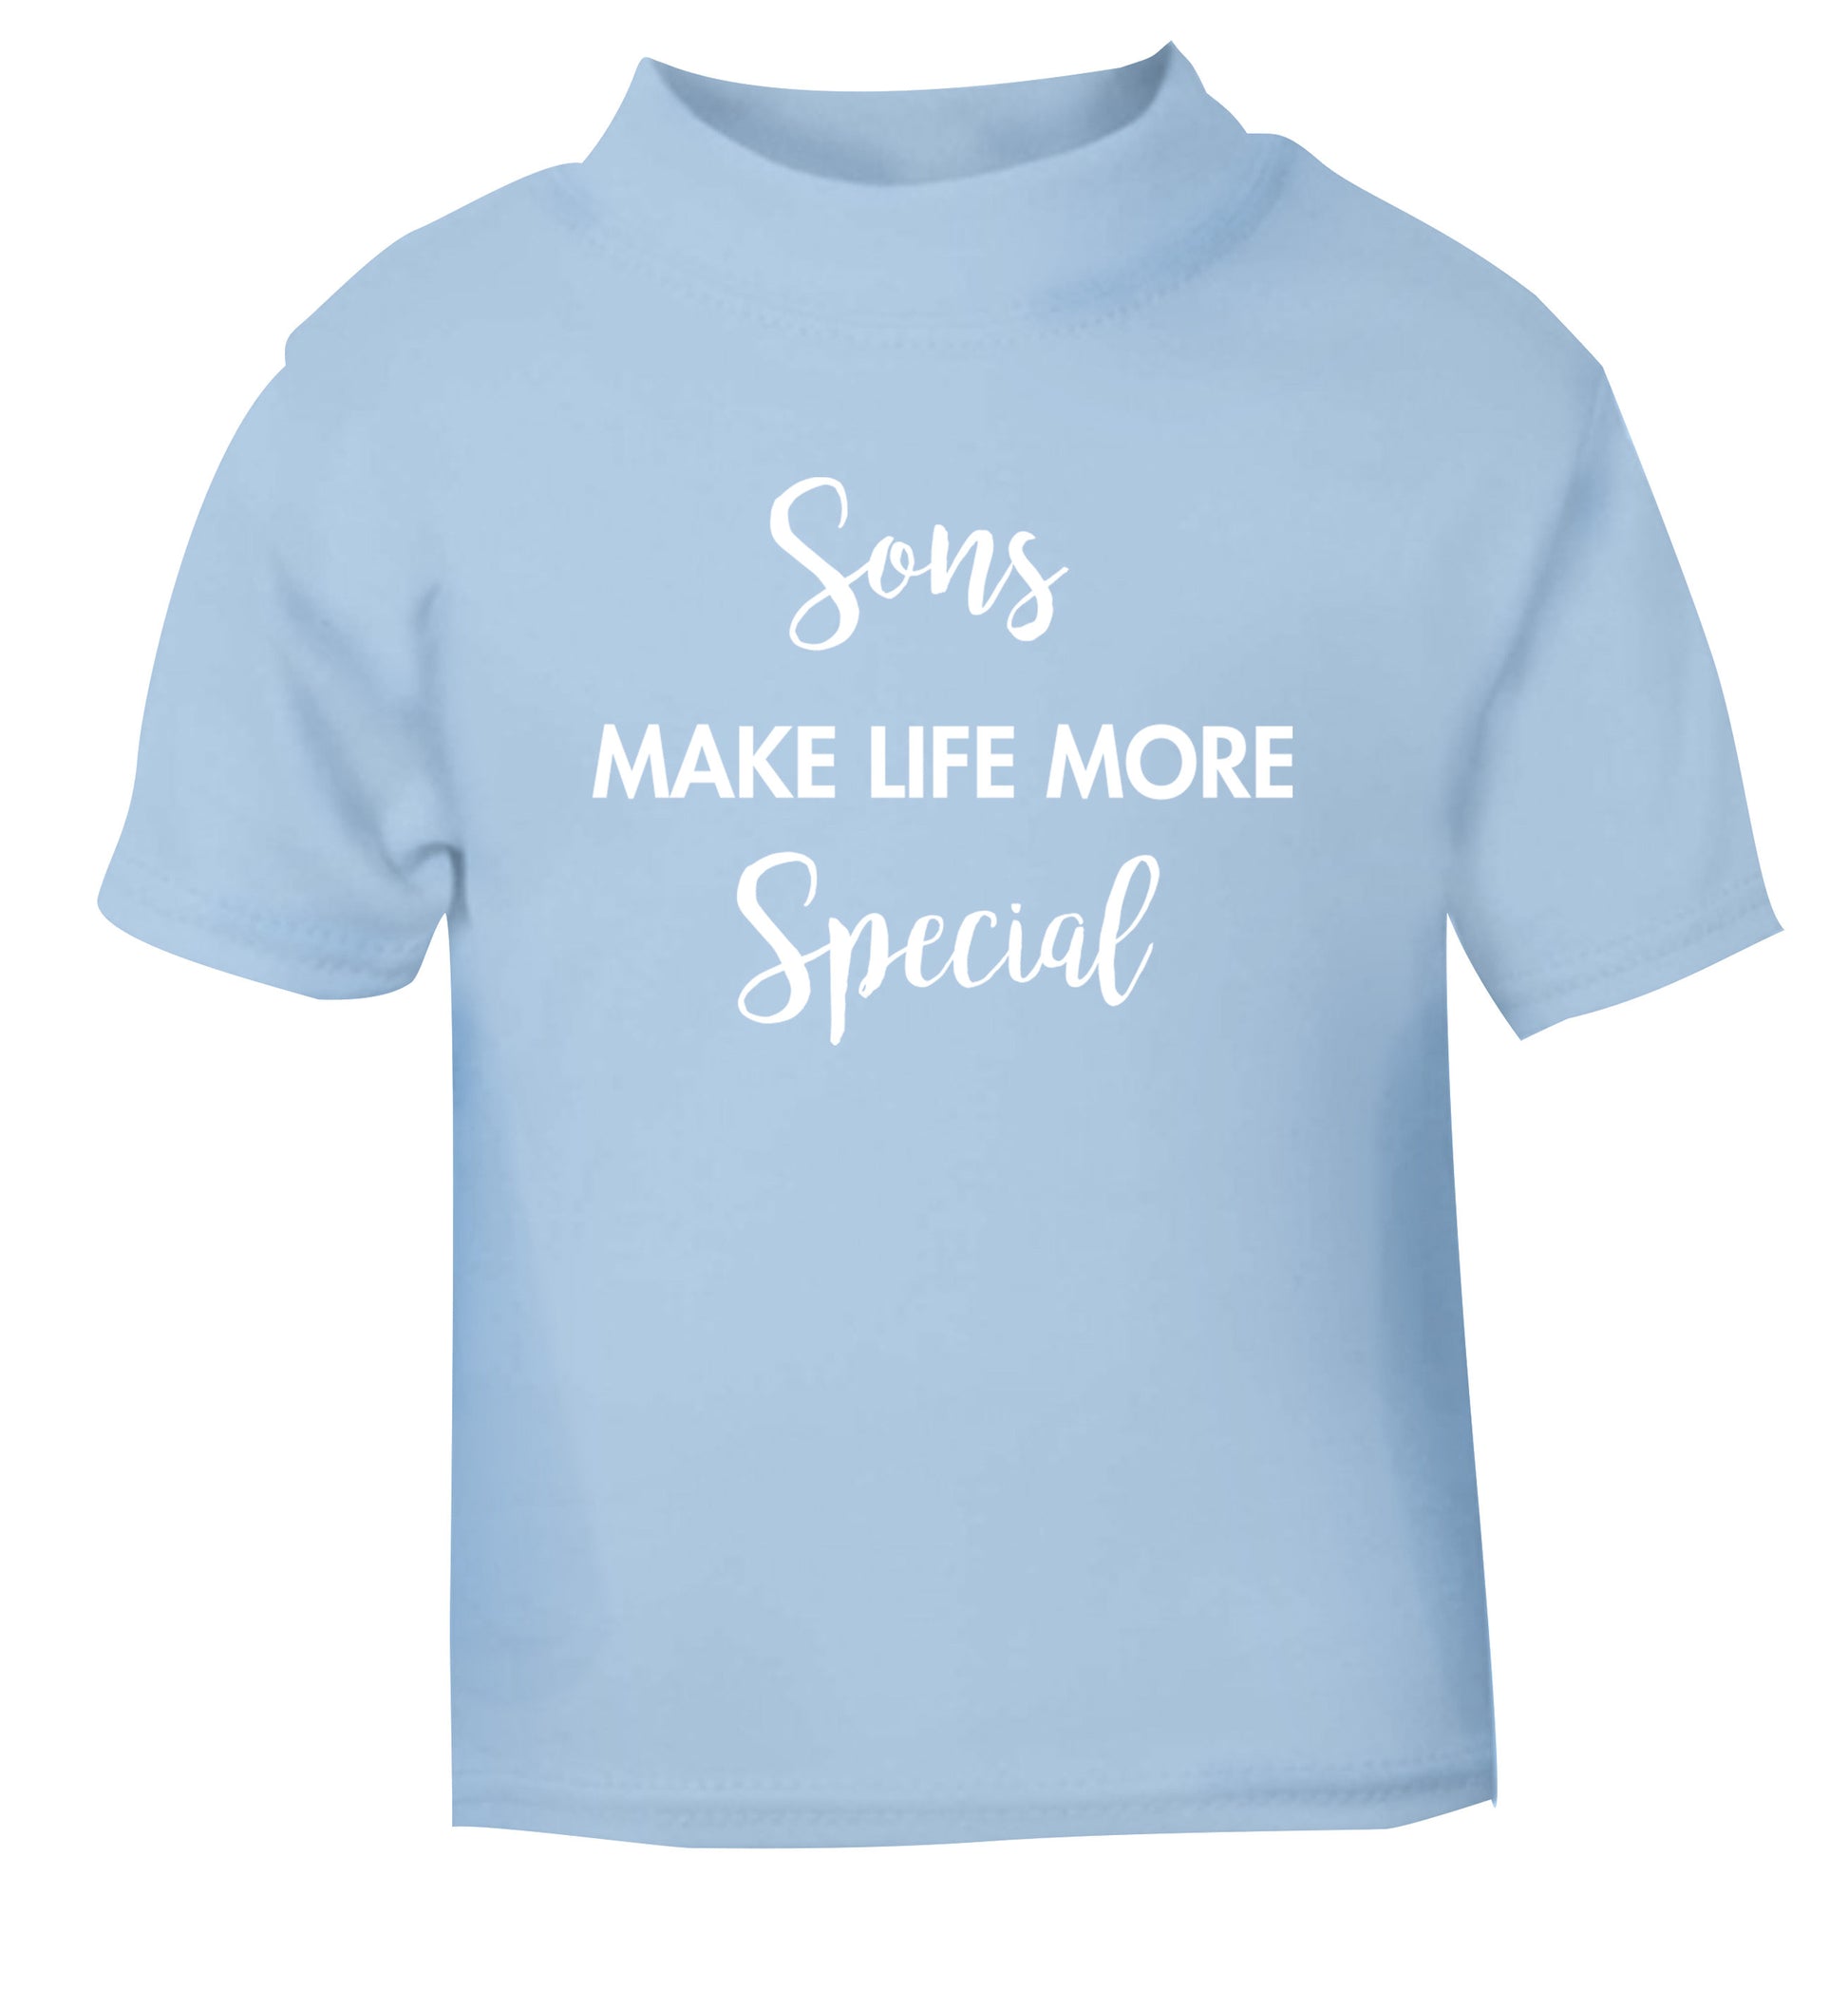 Daughters make life more special light blue Baby Toddler Tshirt 2 Years